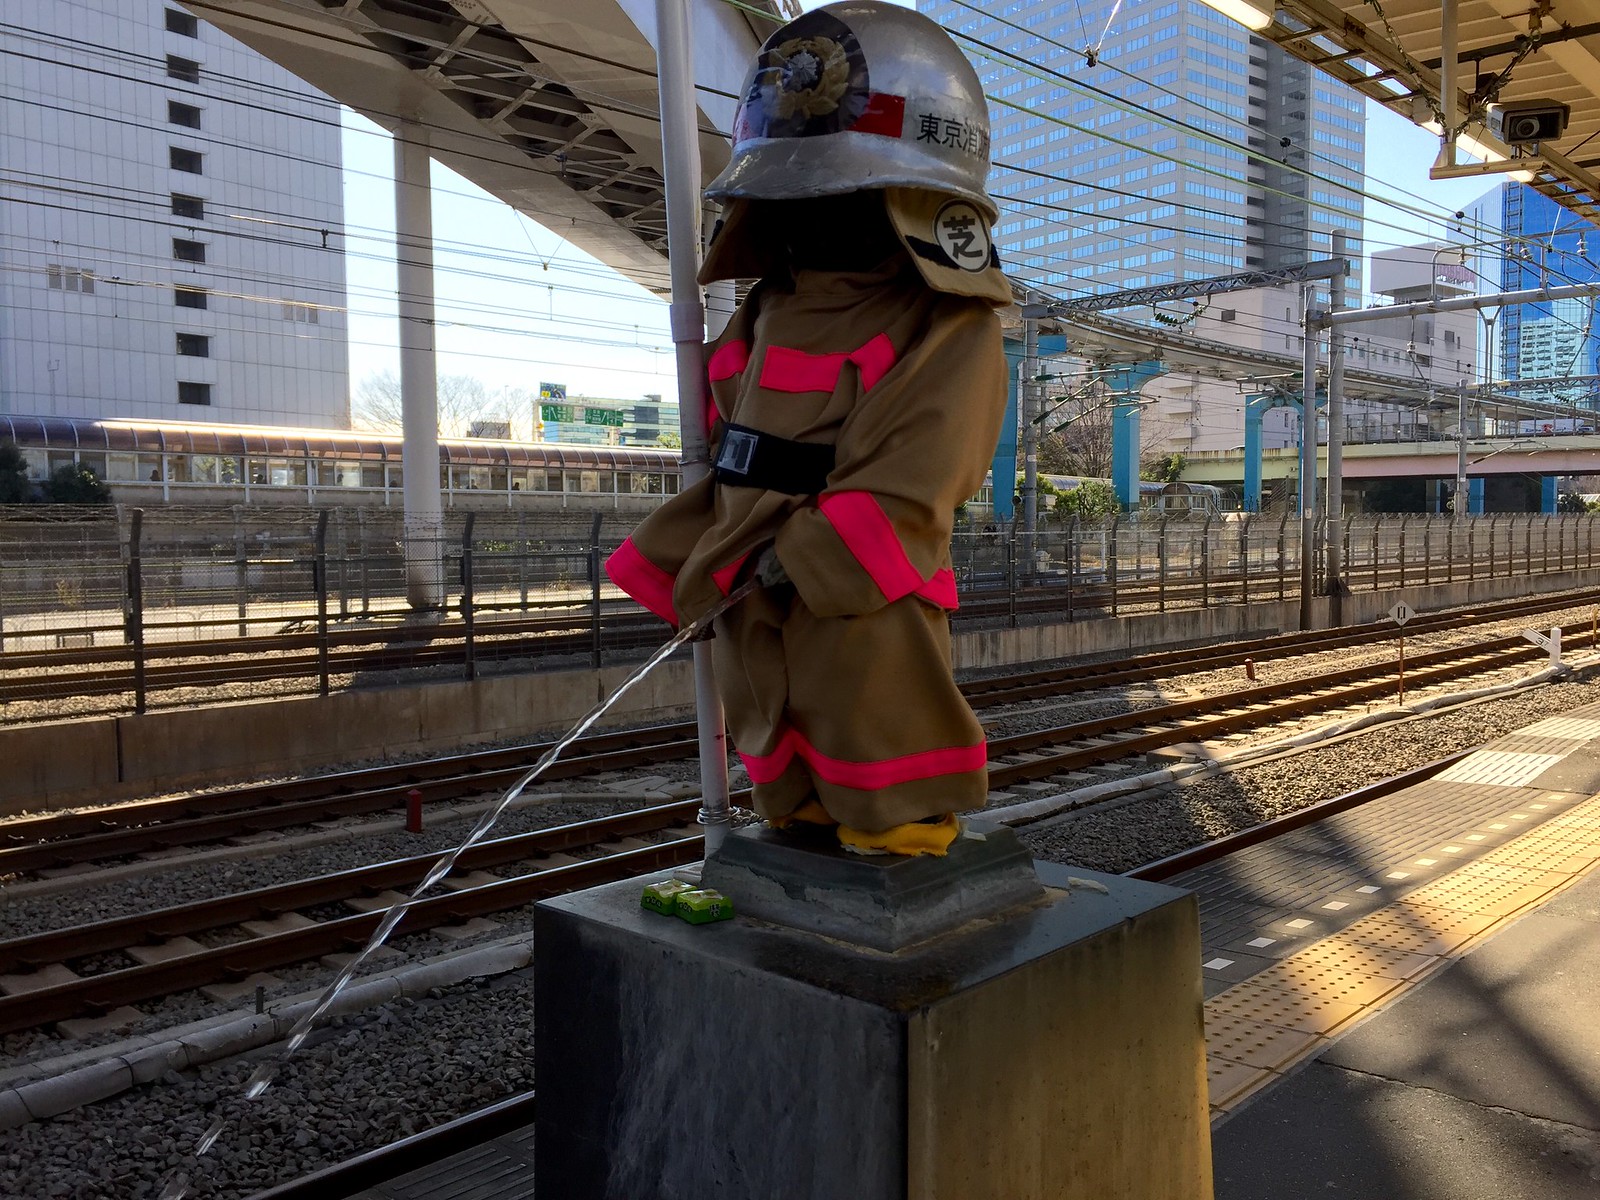 Peeing Boy Statue dressed up as a fireman at JR Hamamatsucho Station